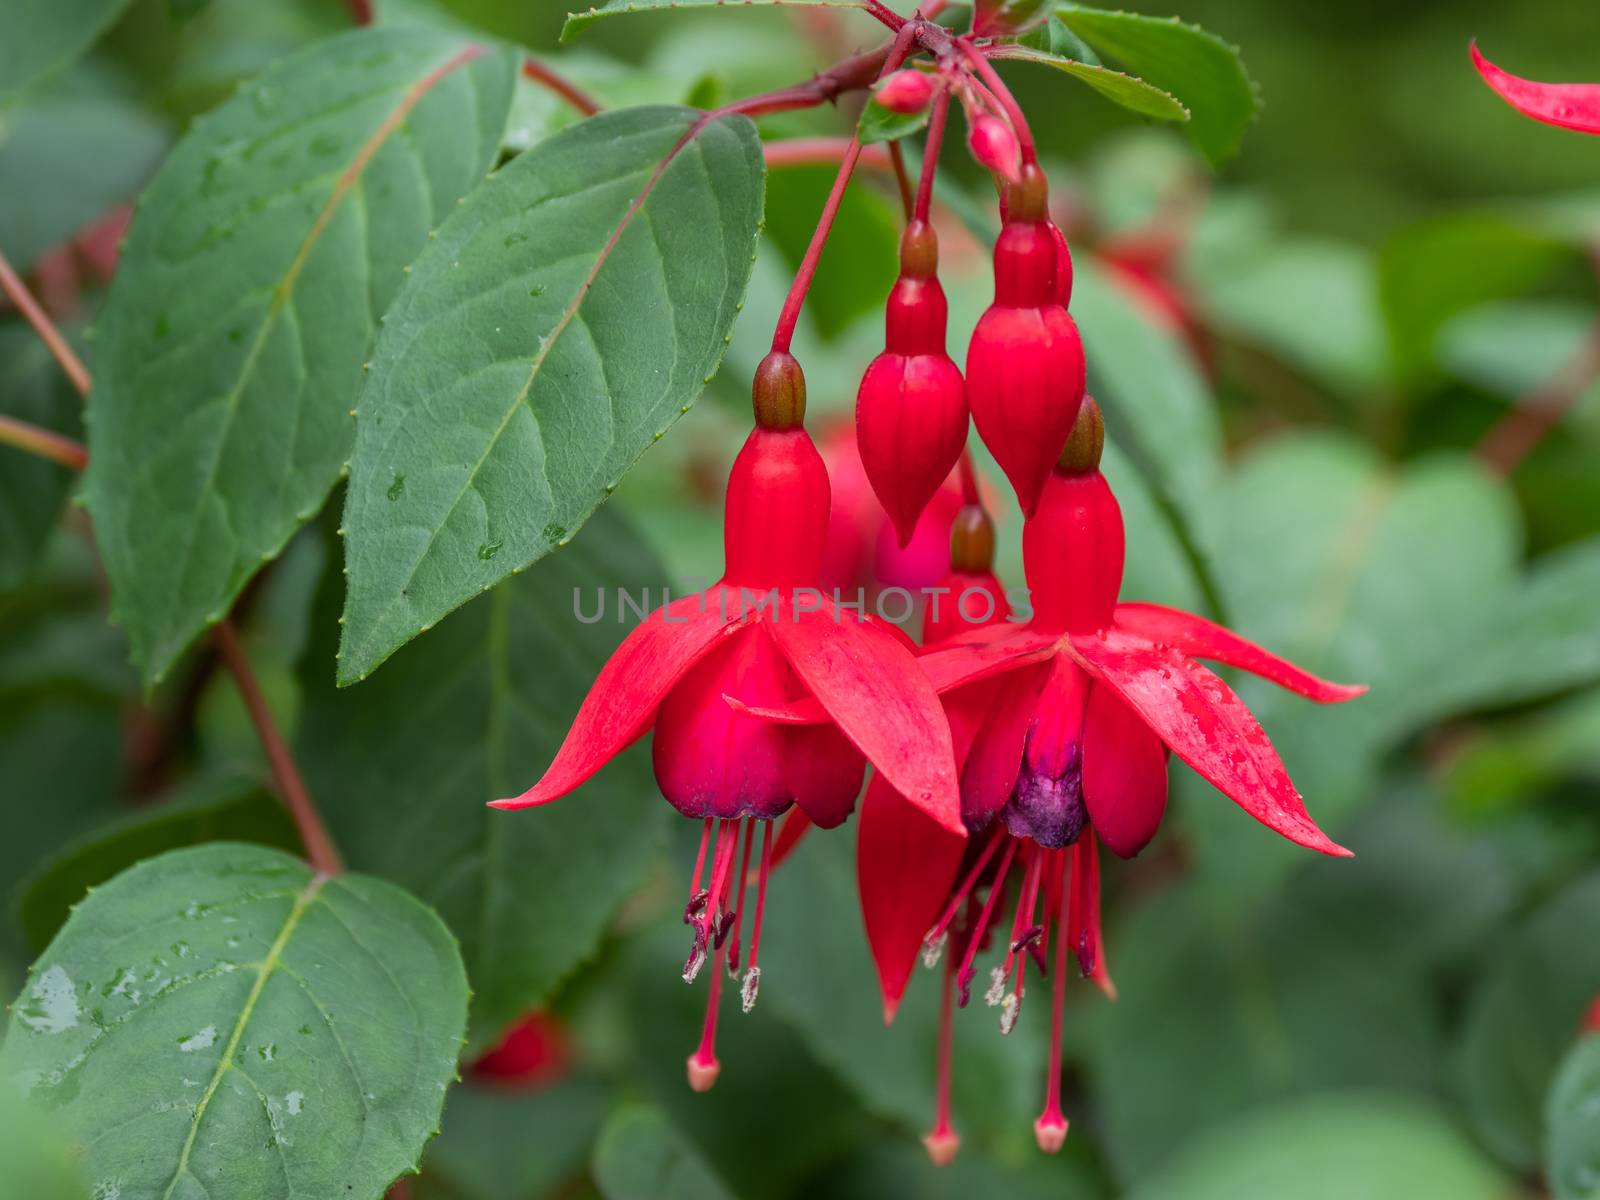 Blooming Fuchsia after rain. Close up photo of red flowers with raindrops on leaves and petals. by aksenovko